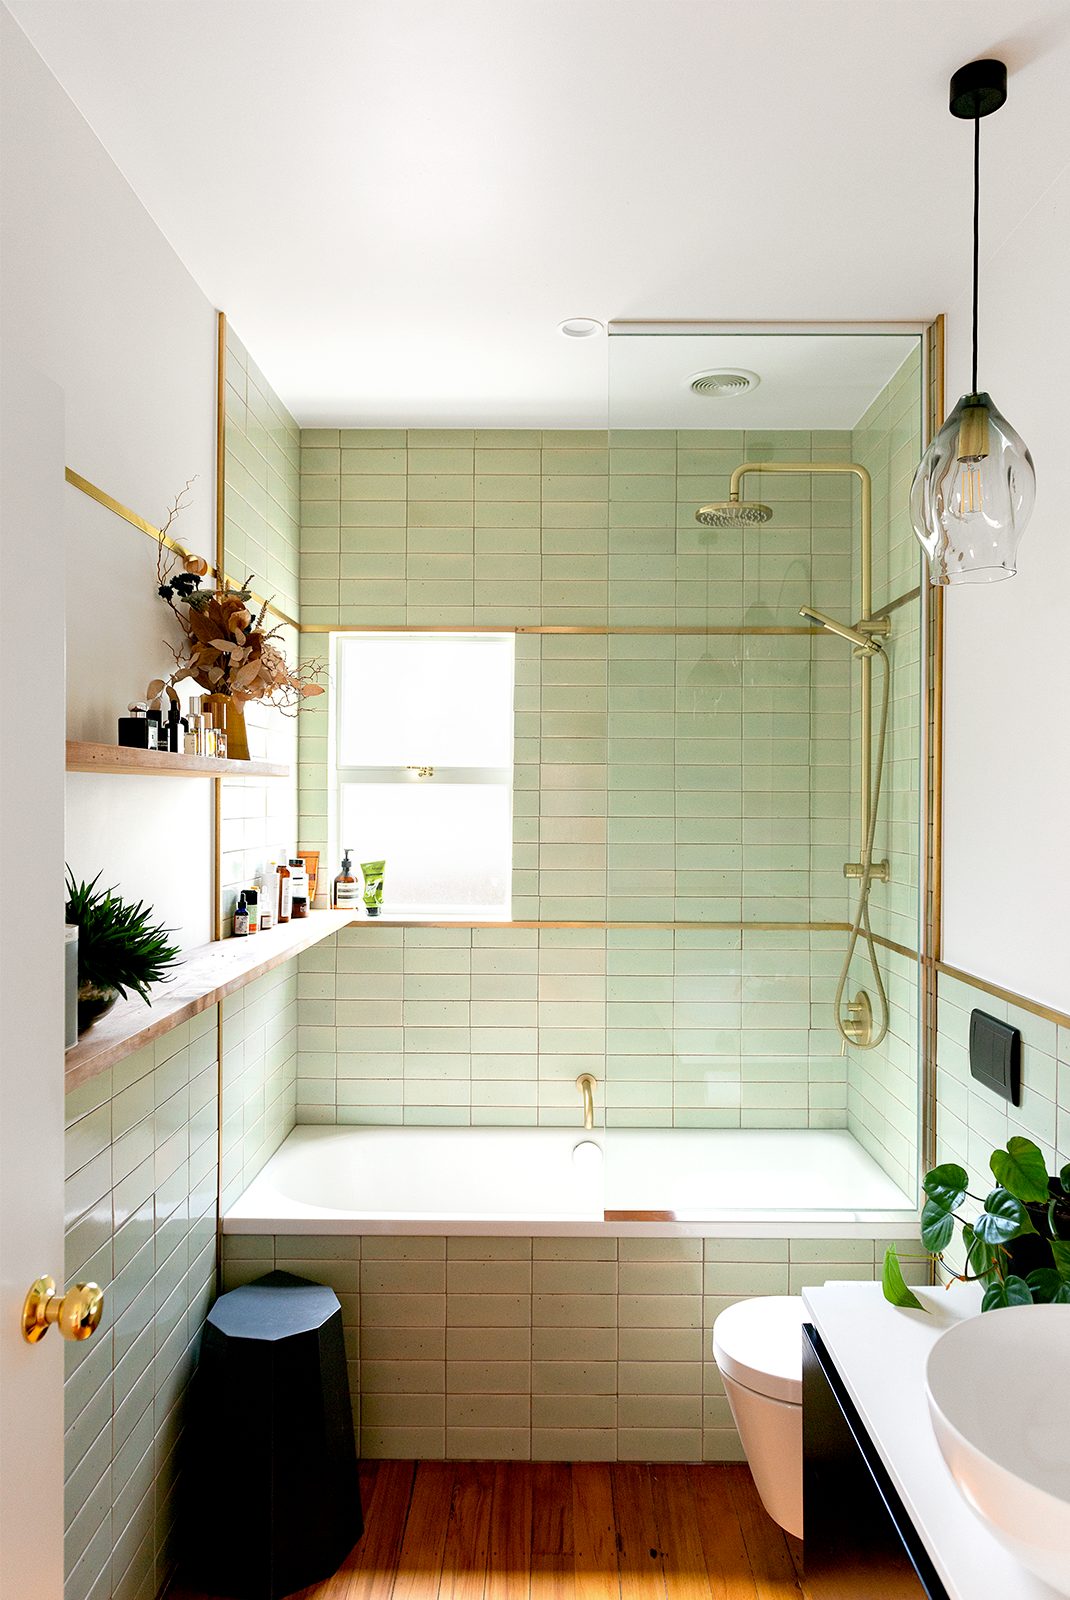 Bathroom with green tiles and hanging lights with brass and black touches